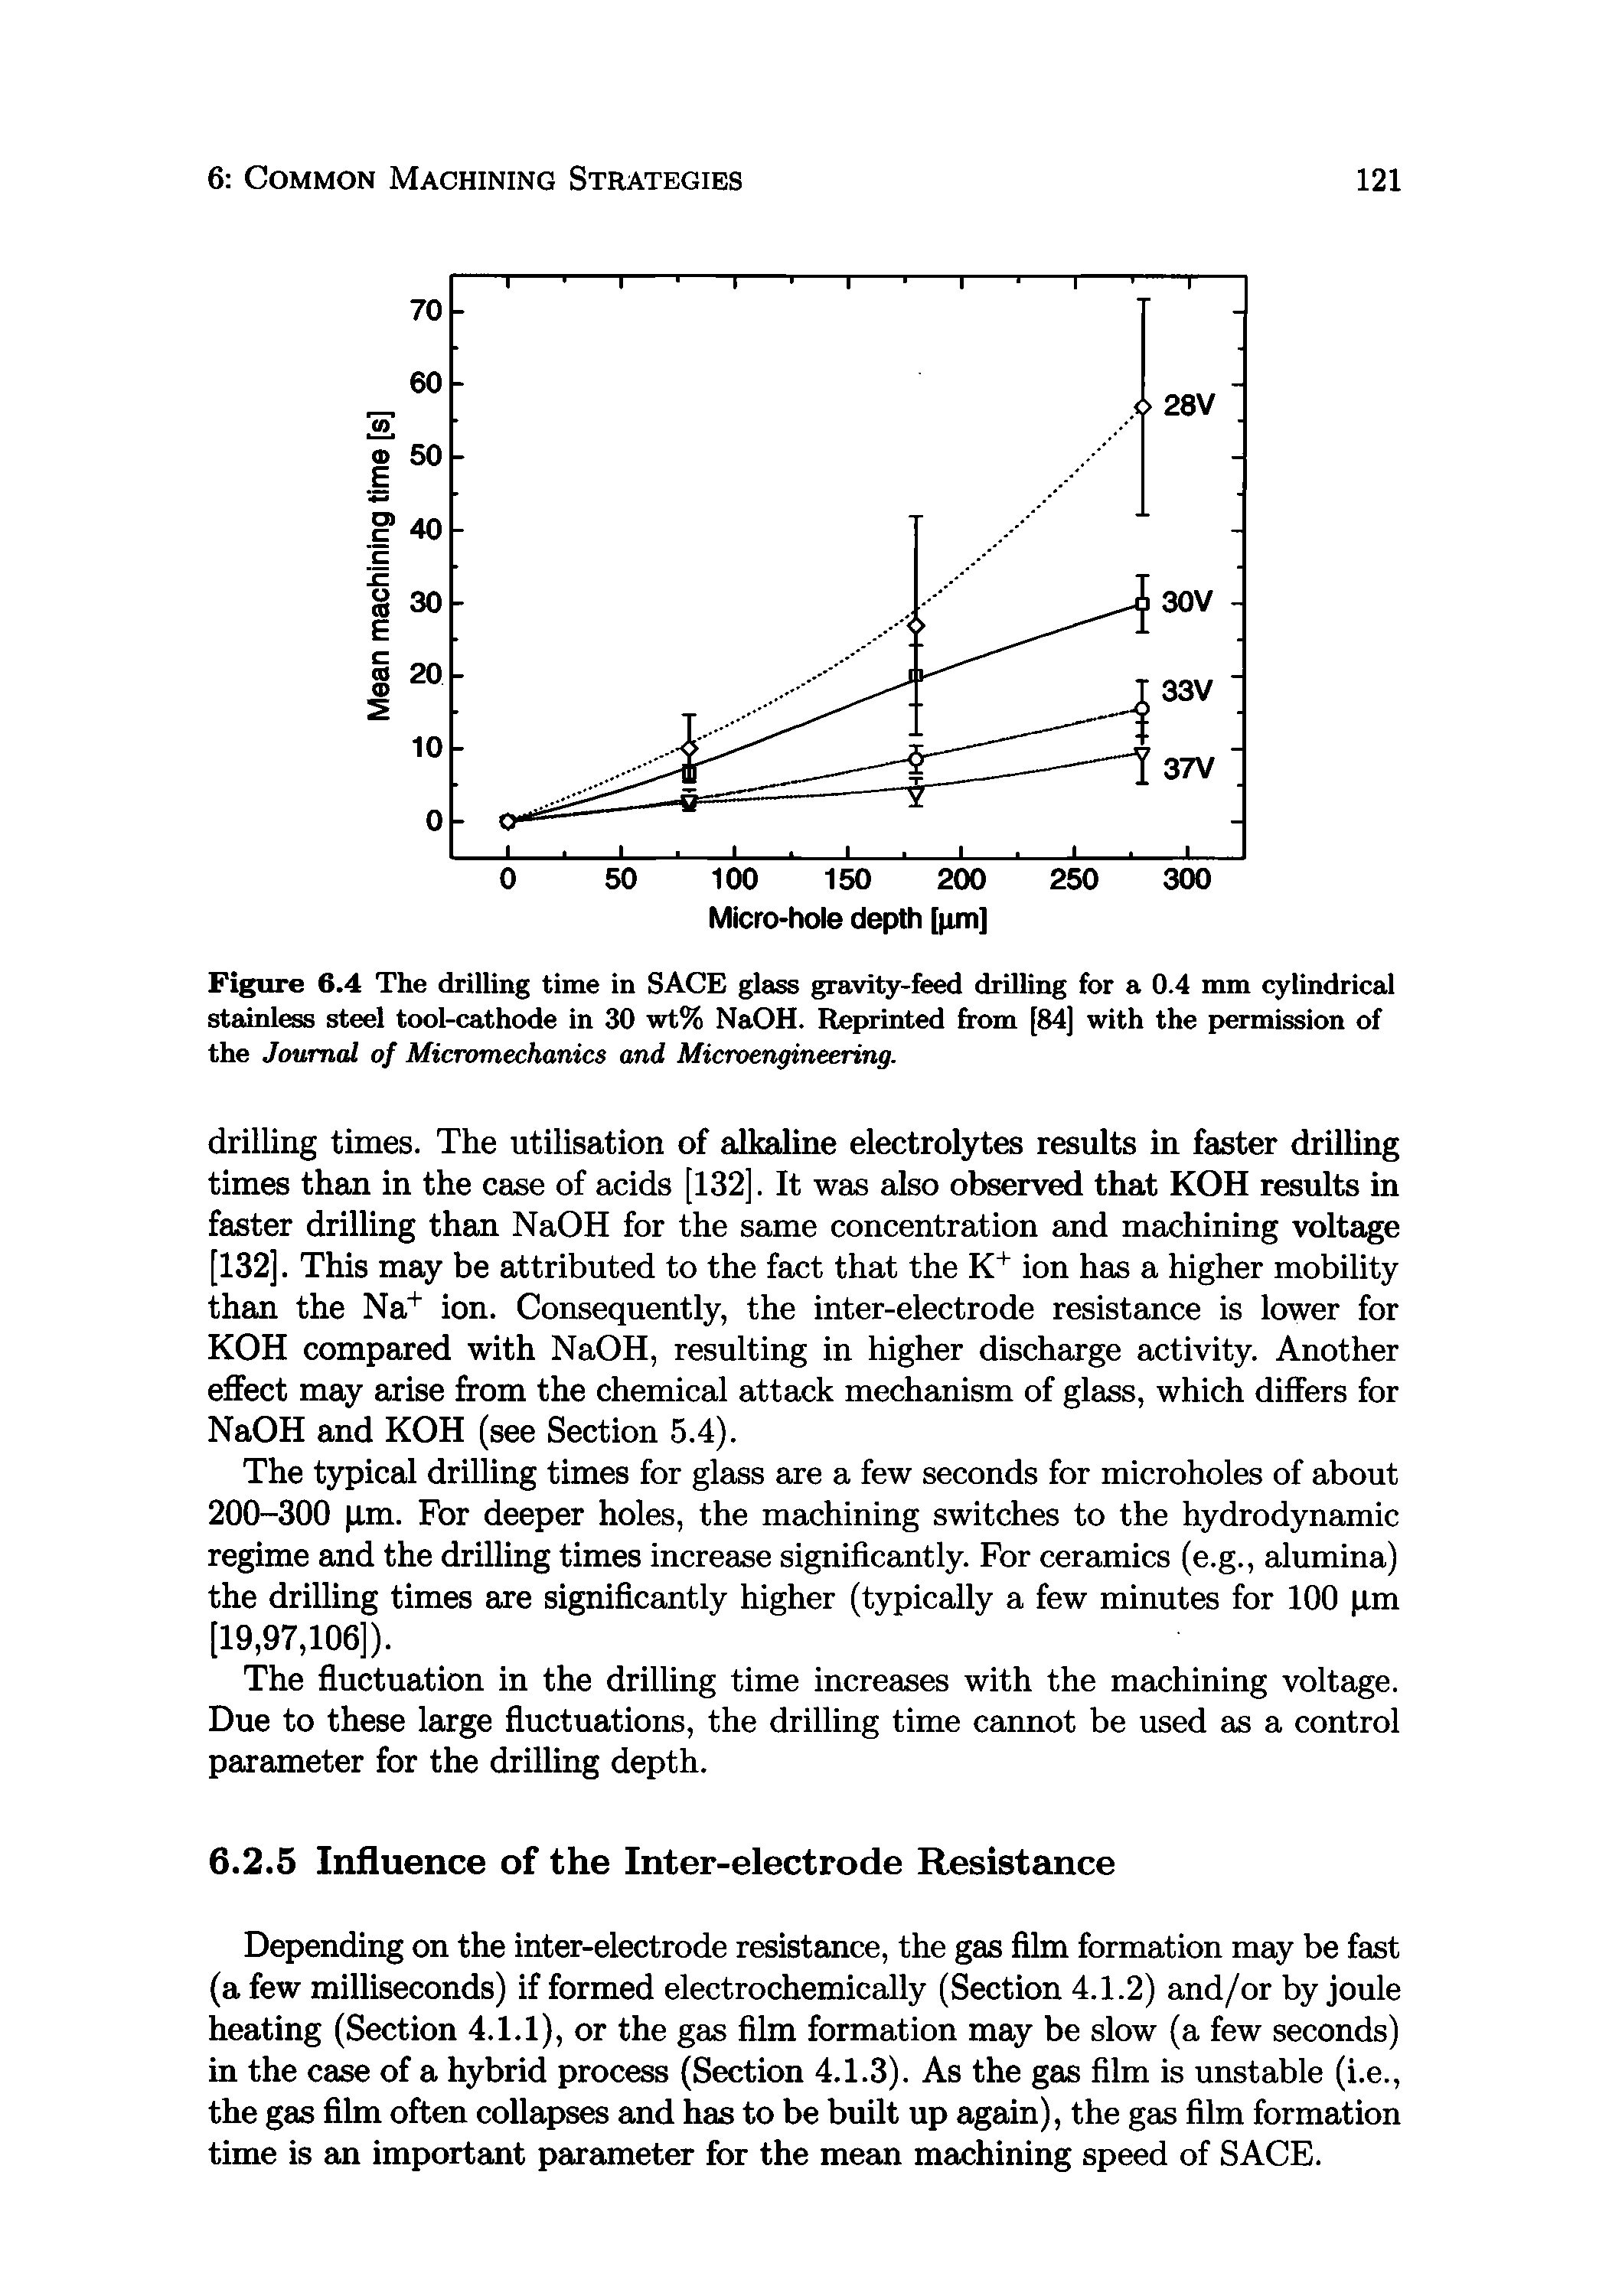 Figure 6.4 The drilling time in SACE glass gravity-feed drilling for a 0.4 mm cylindrical stainless steel tool-cathode in 30 wt% NaOH. Reprinted from [84] with the permission of the Journal of Micromechanics and Microengineering.